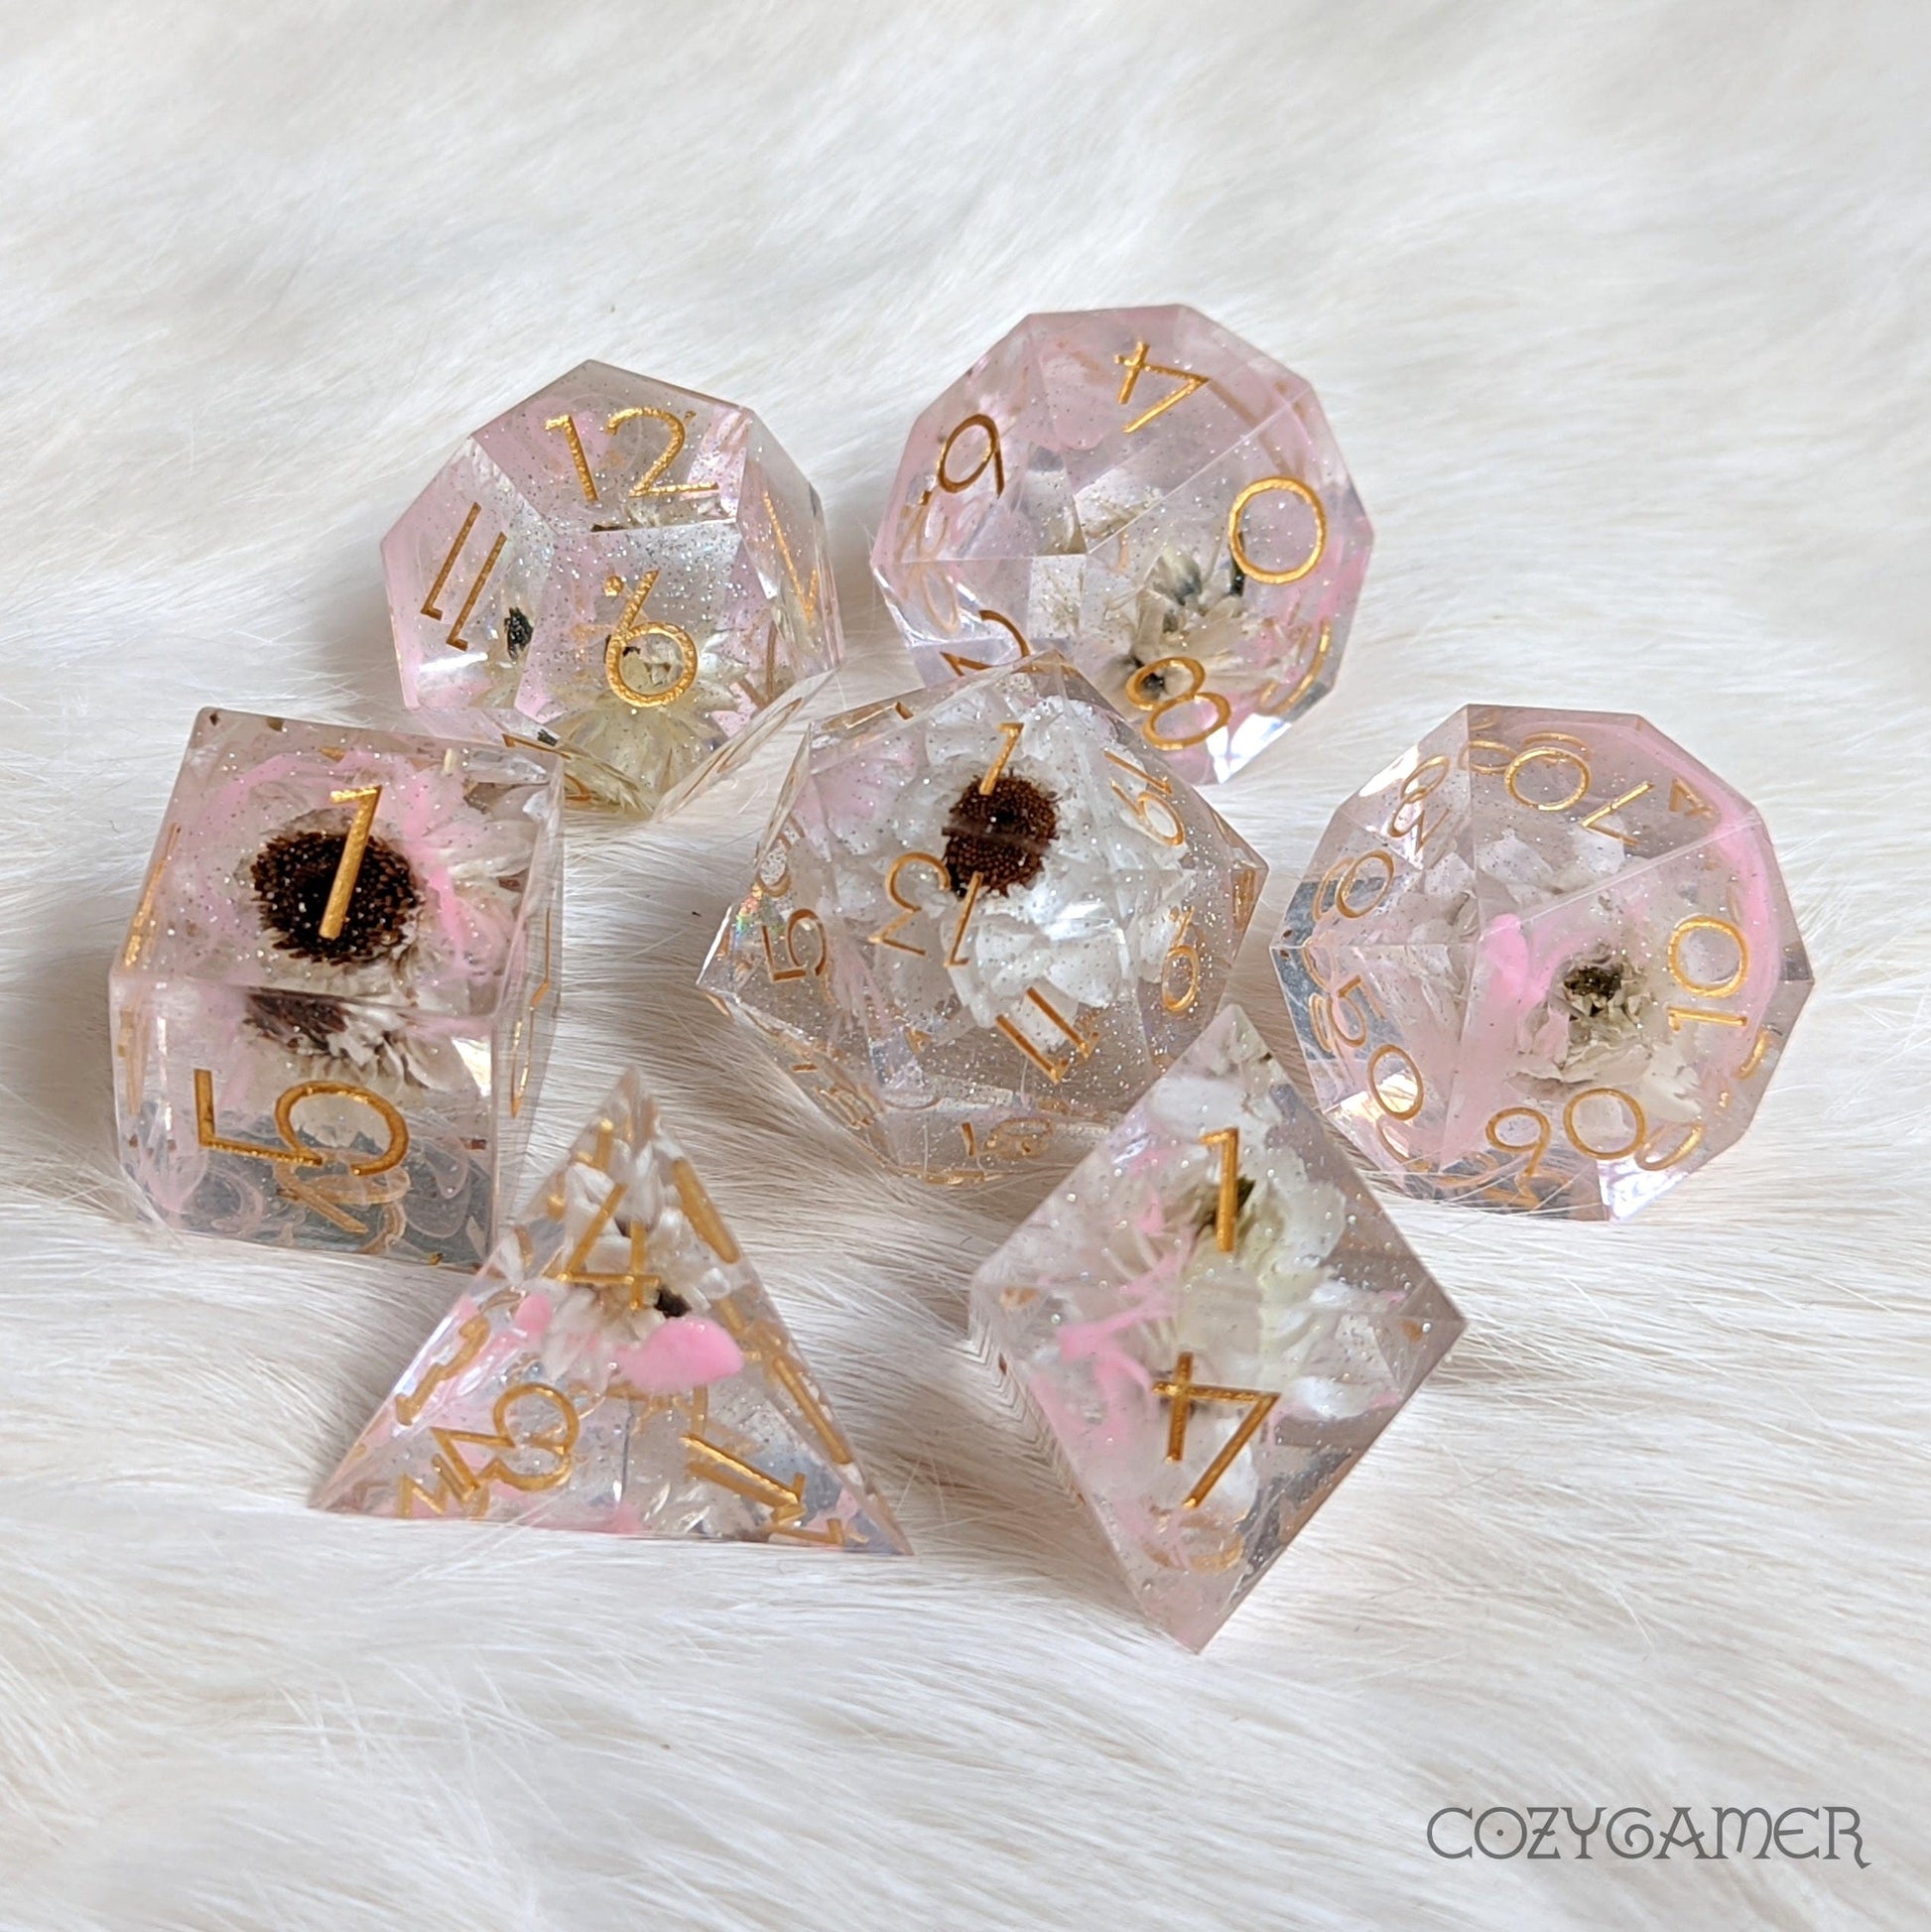 Whispering Daisy Handmade Sharp Edge Resin Dice Set. 7 Piece DND dice set with real dried flowers